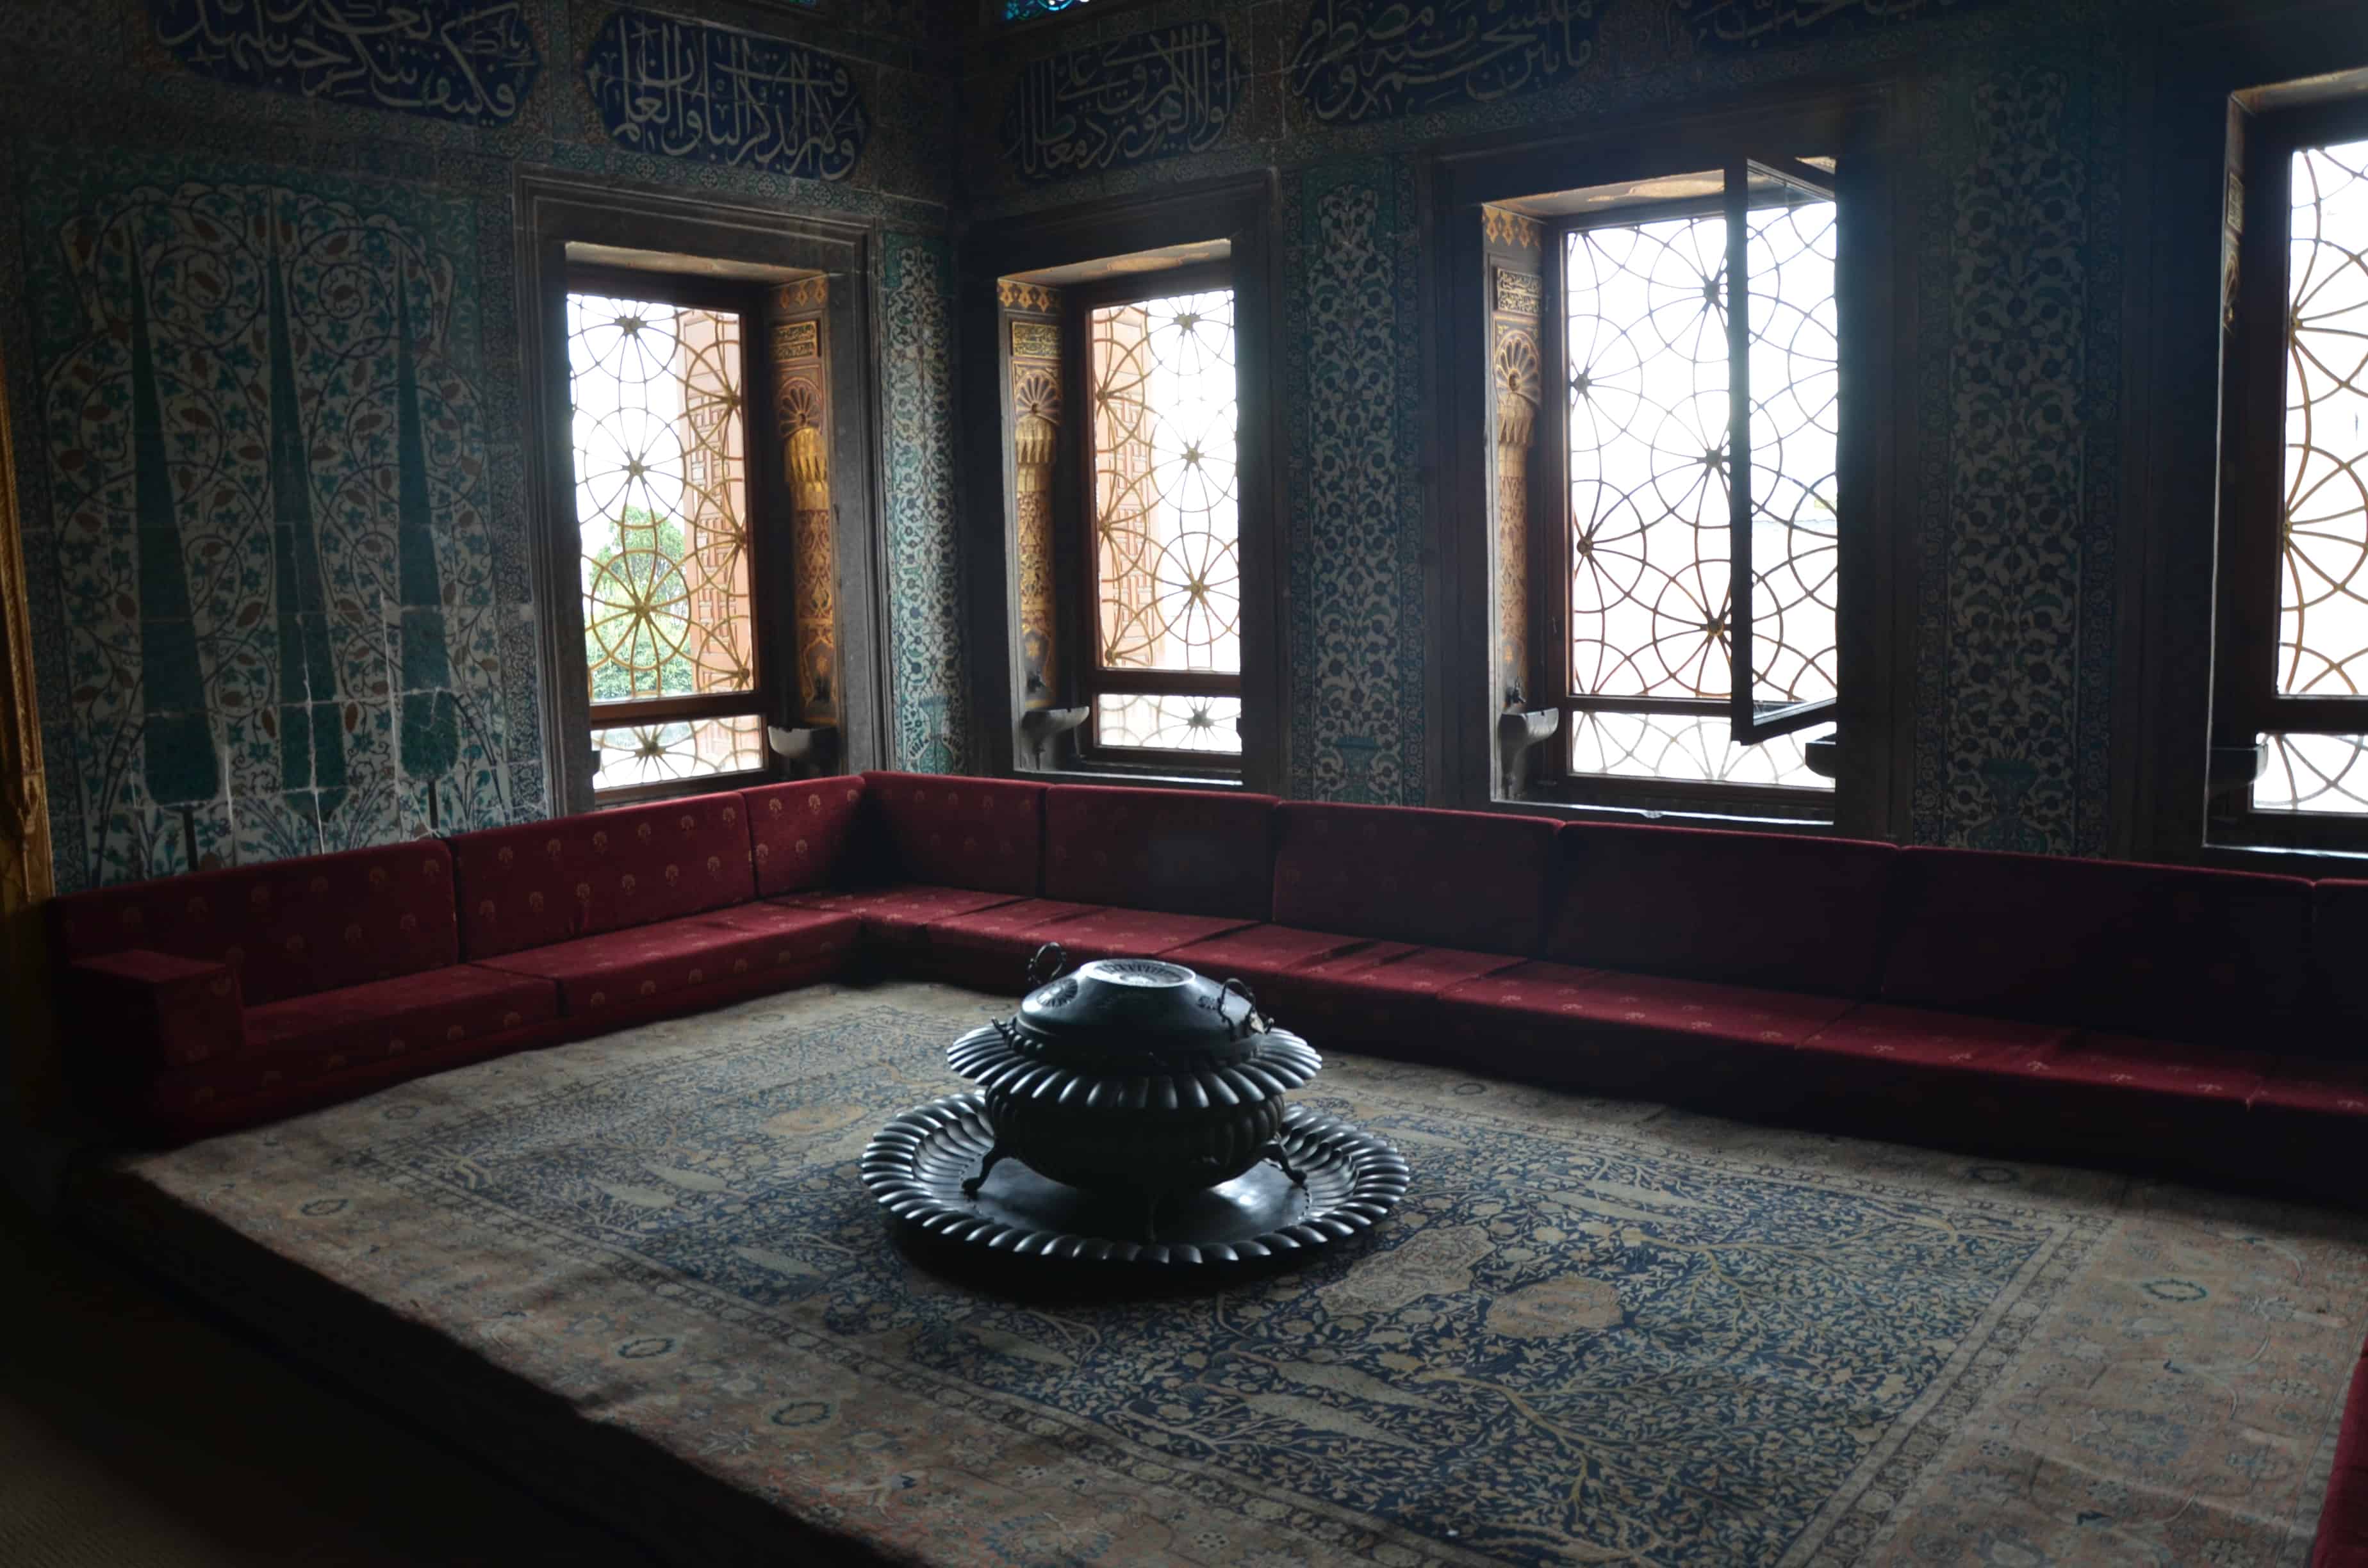 Room with the flat roof in the Twin Kiosk in the Imperial Harem at Topkapi Palace in Istanbul, Turkey